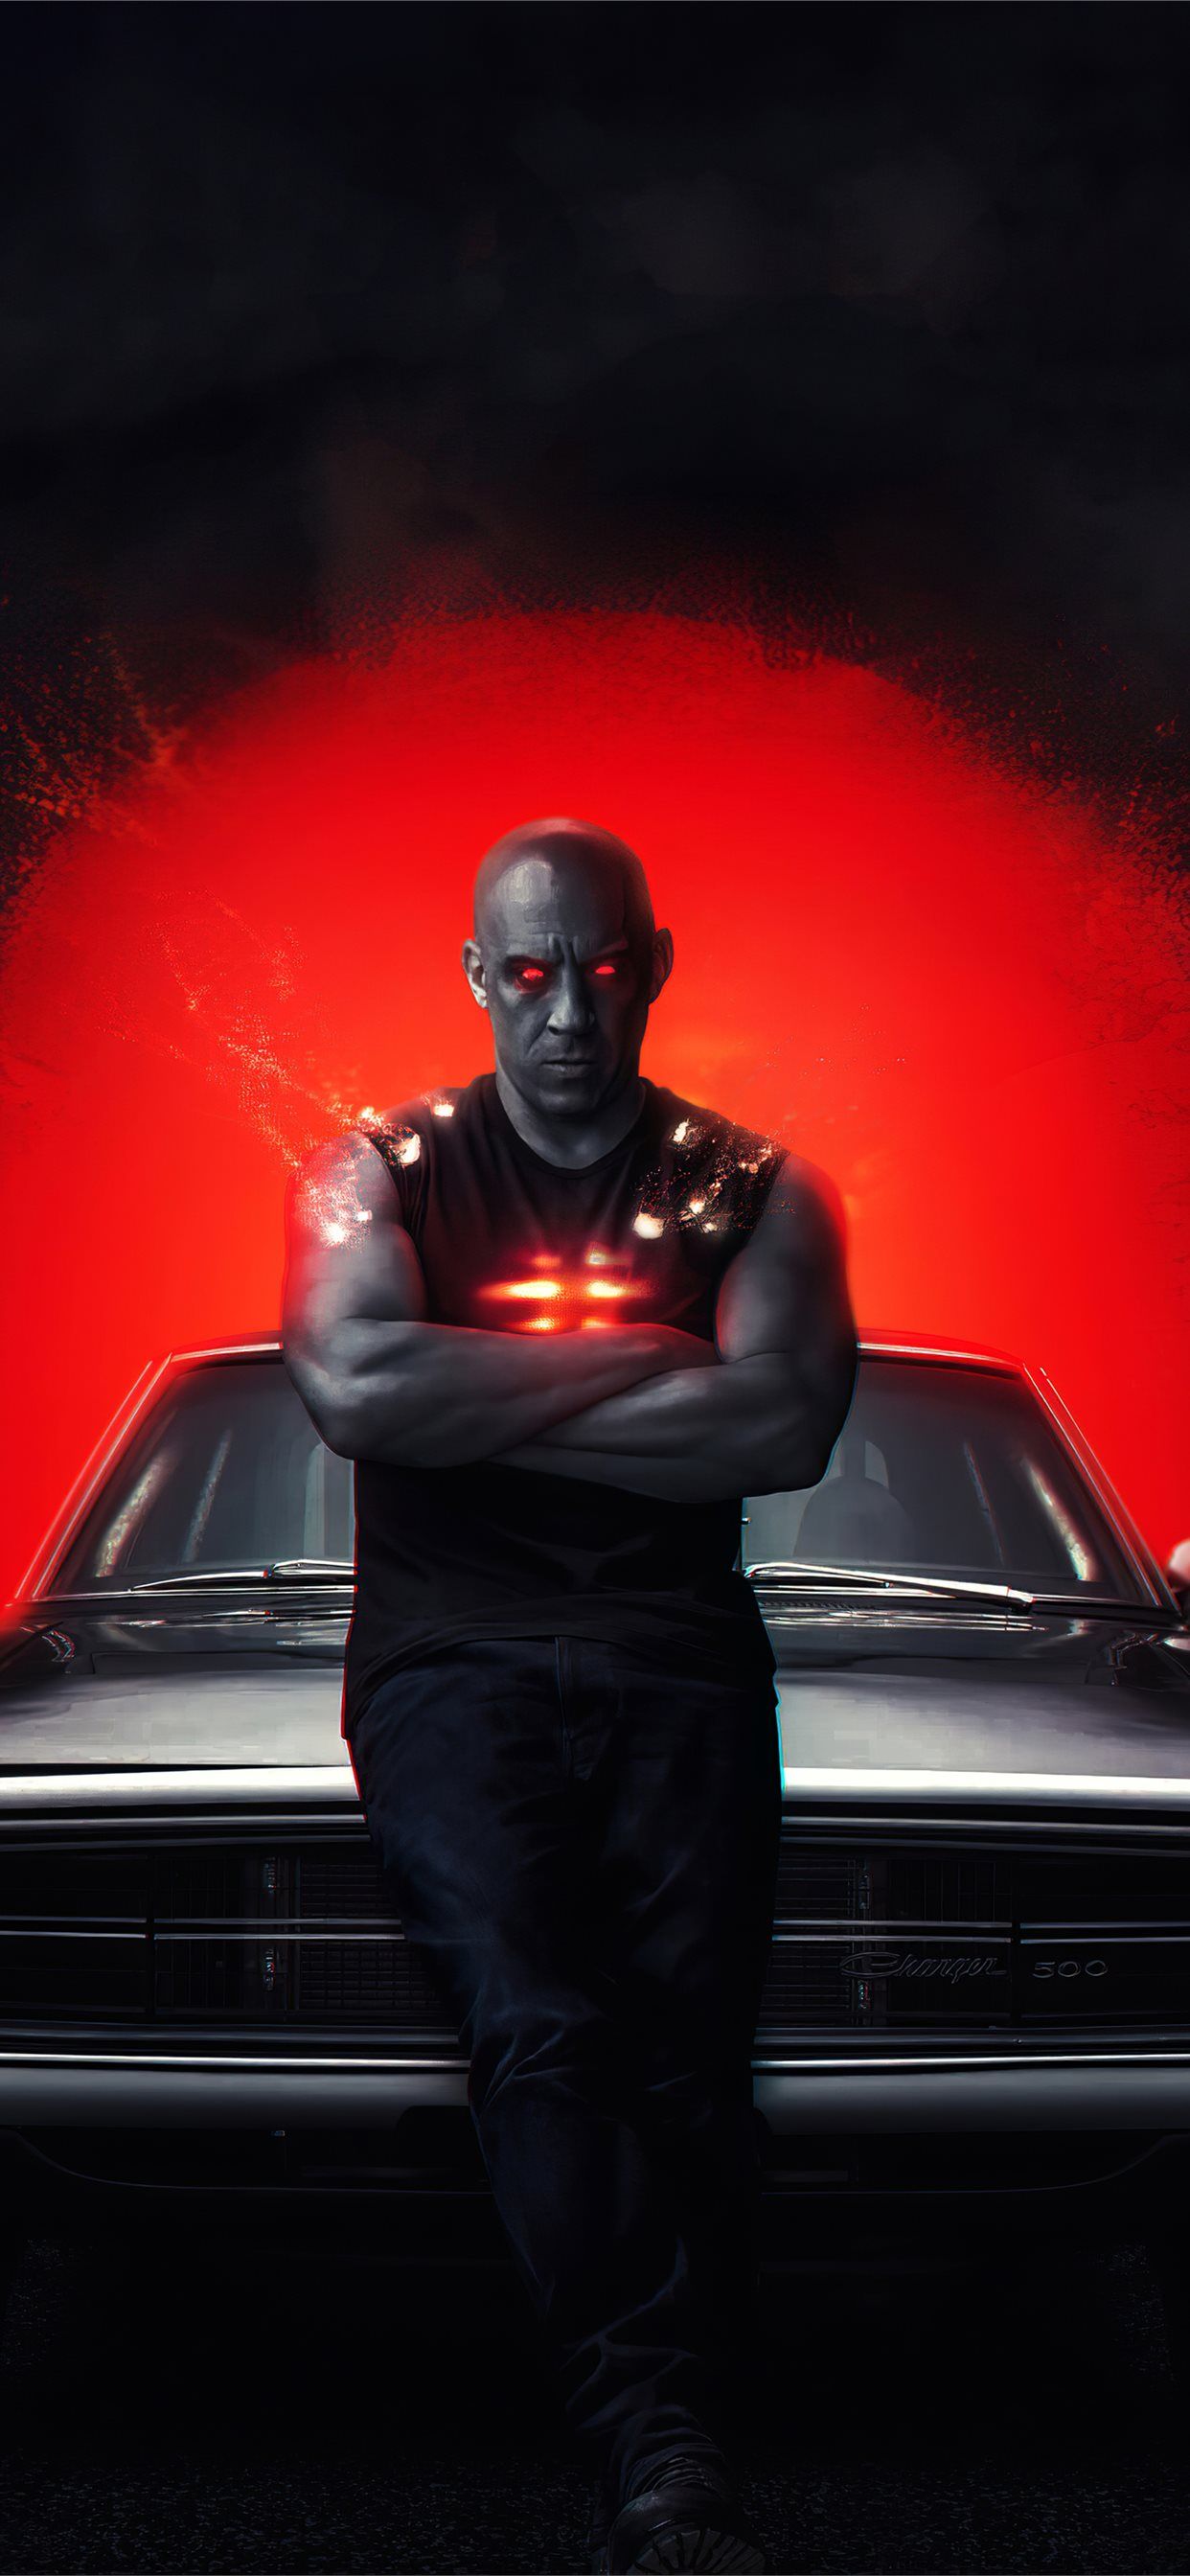 bloodshot x fast and furious 9 movie 4k 2020 iPhone 11 Wallpapers Free Download